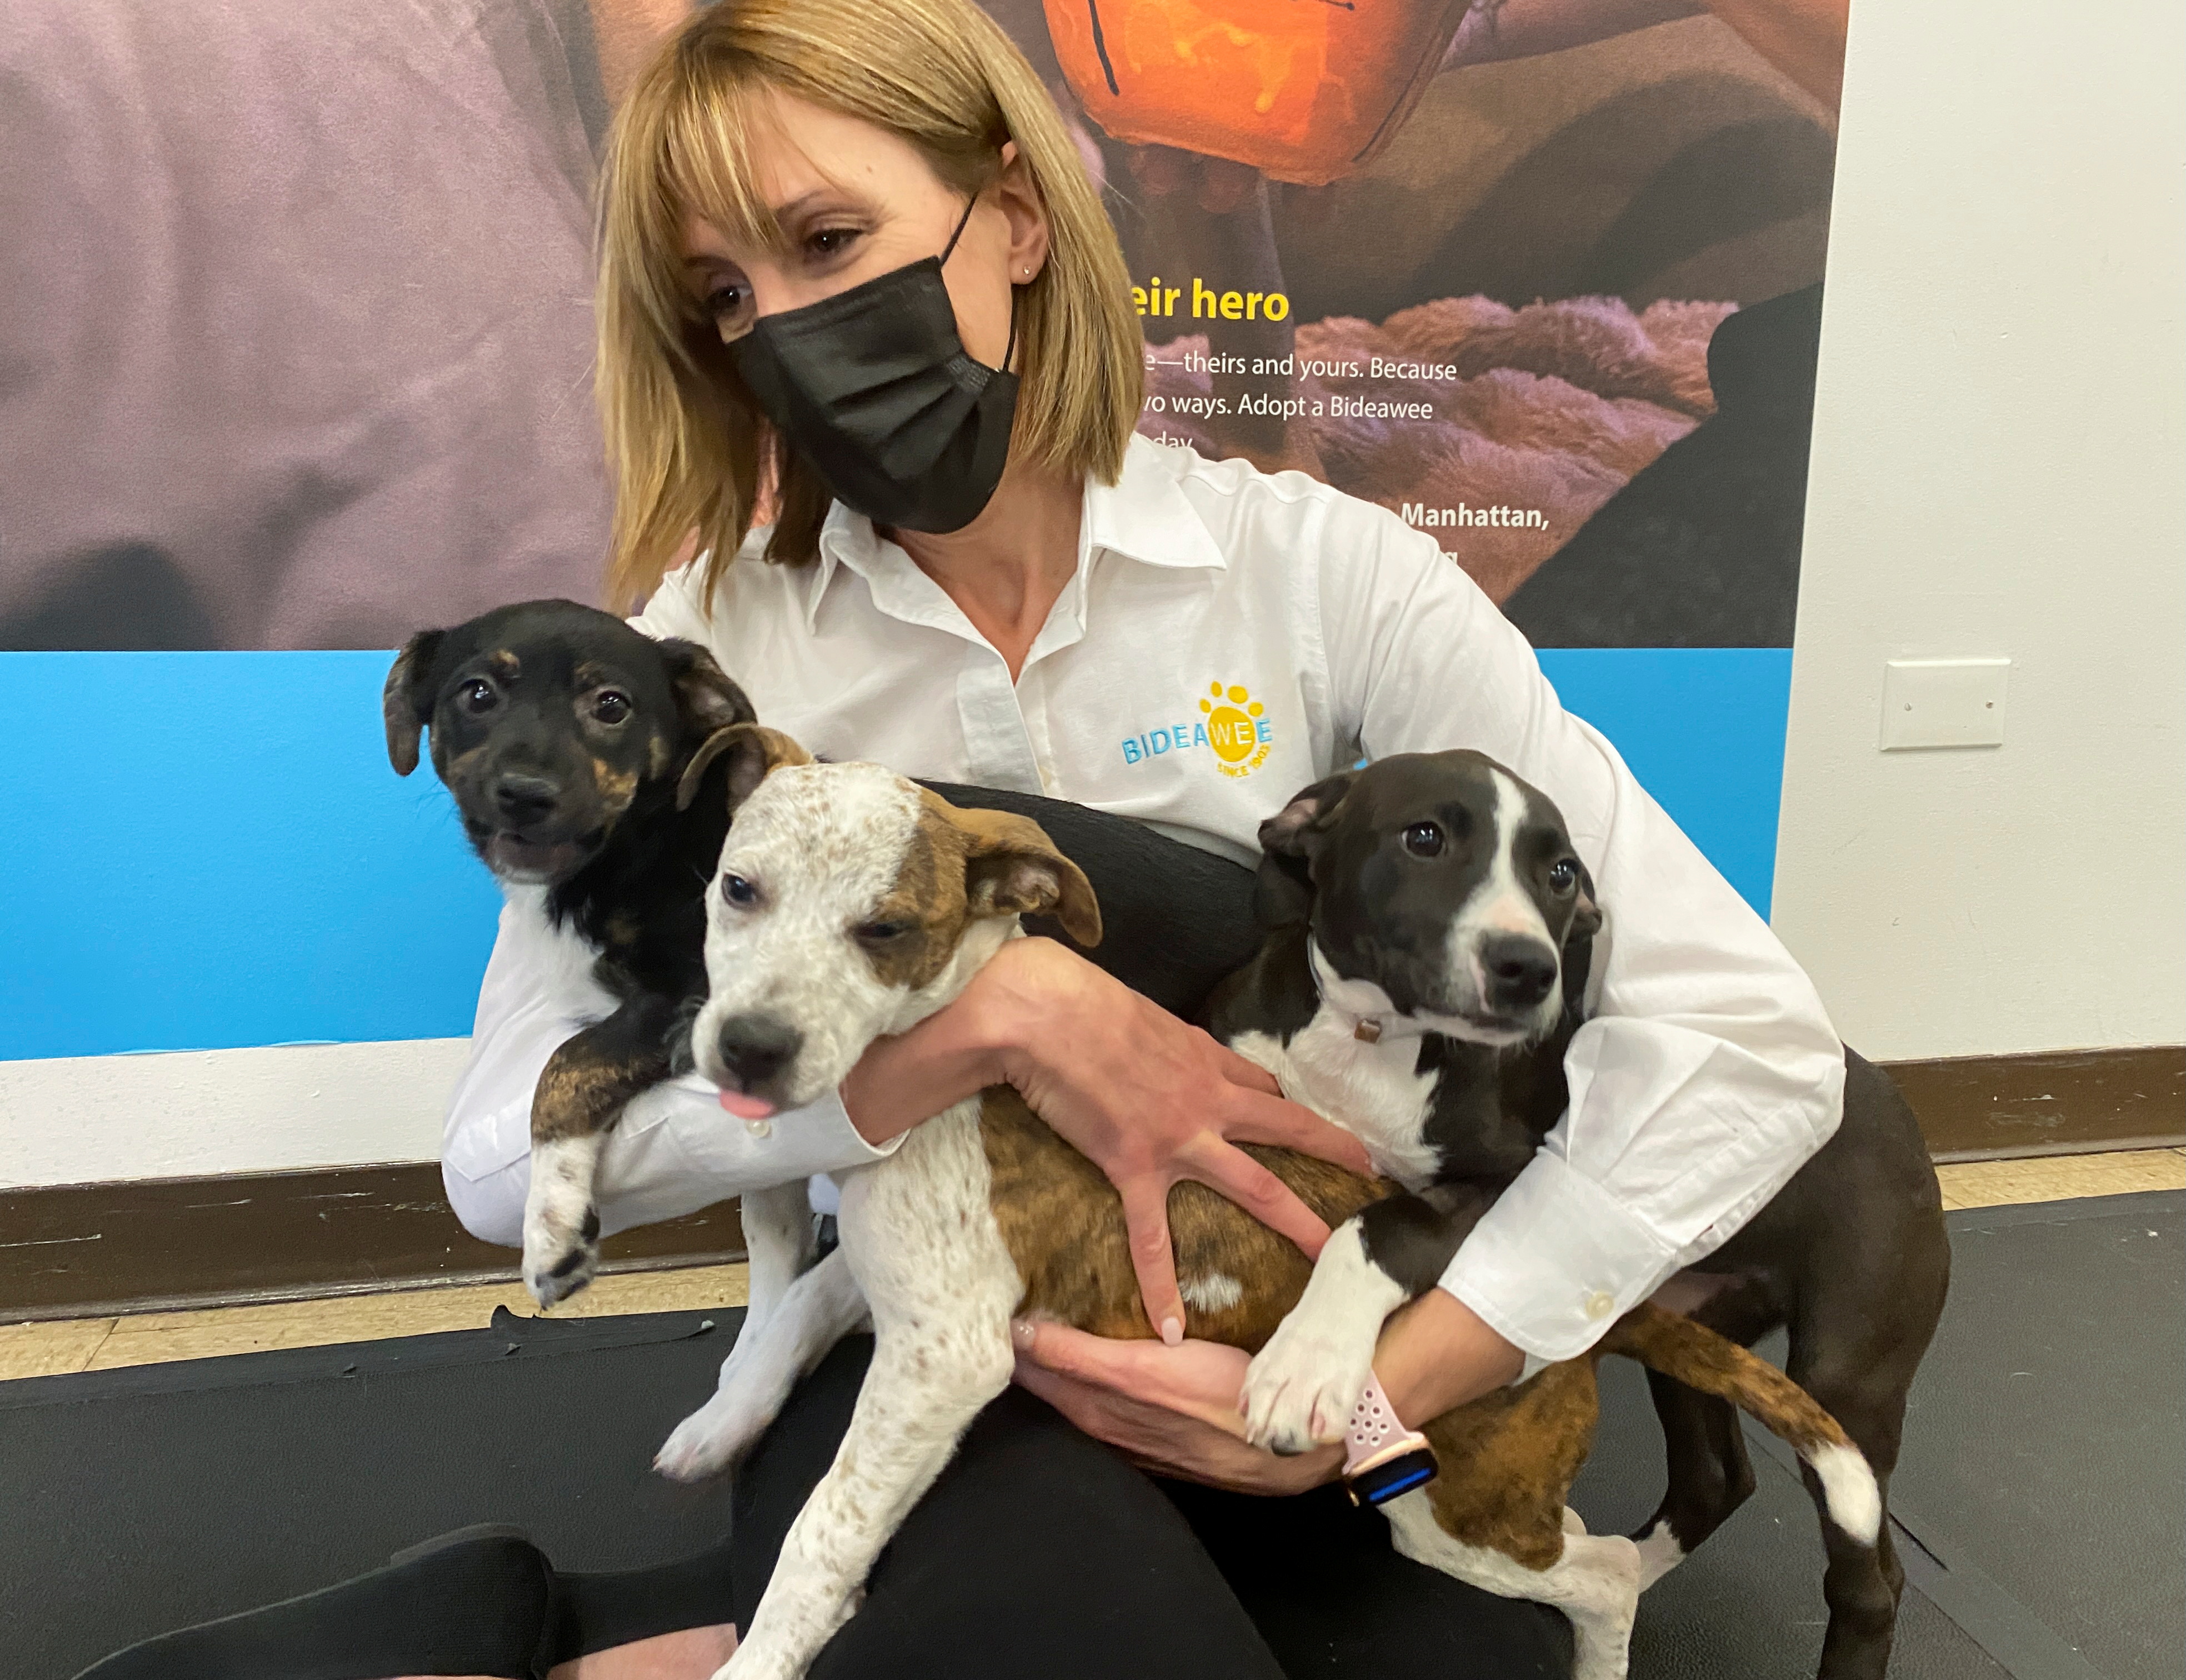 Leslie Granger, president and CEO of the animal welfare organization Bideawee, holds 8-week-old puppies up for adoption, in New York City, New York, U.S., April 30, 2021. REUTERS/Roselle Chen